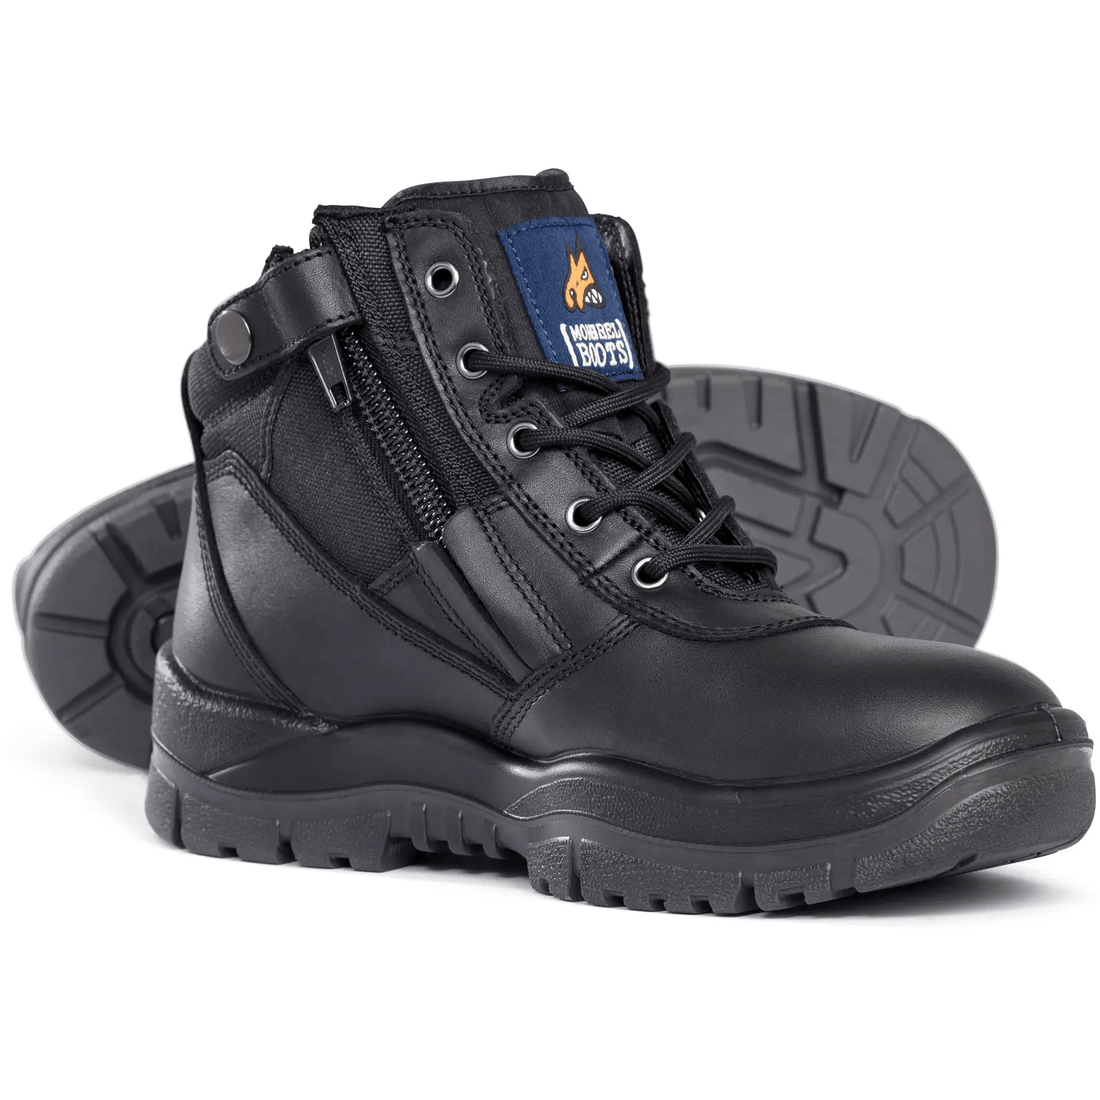 MONGREL ZipSider Safety Boots